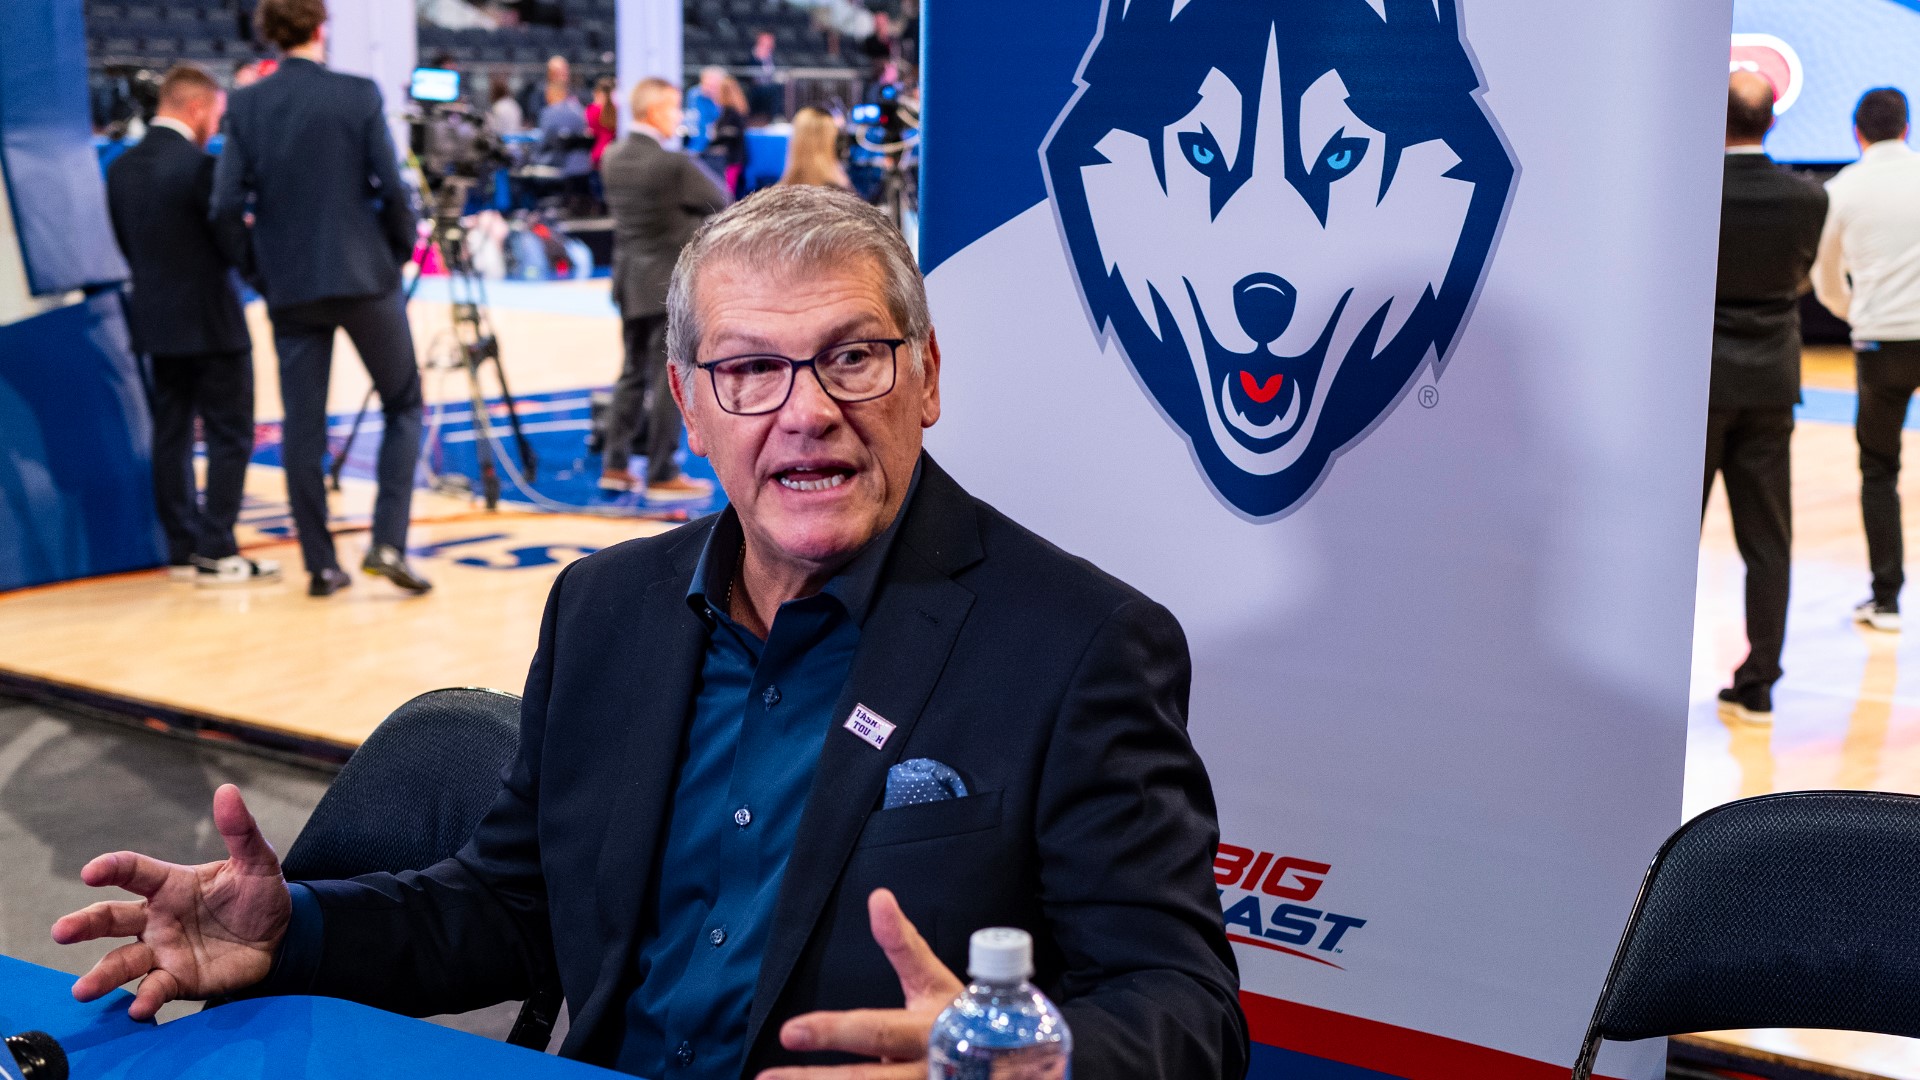 The Huskies have not won a national championship since 2016, but players and coaches say that's all they have on their mind. Jonah Karp reports from MSG.